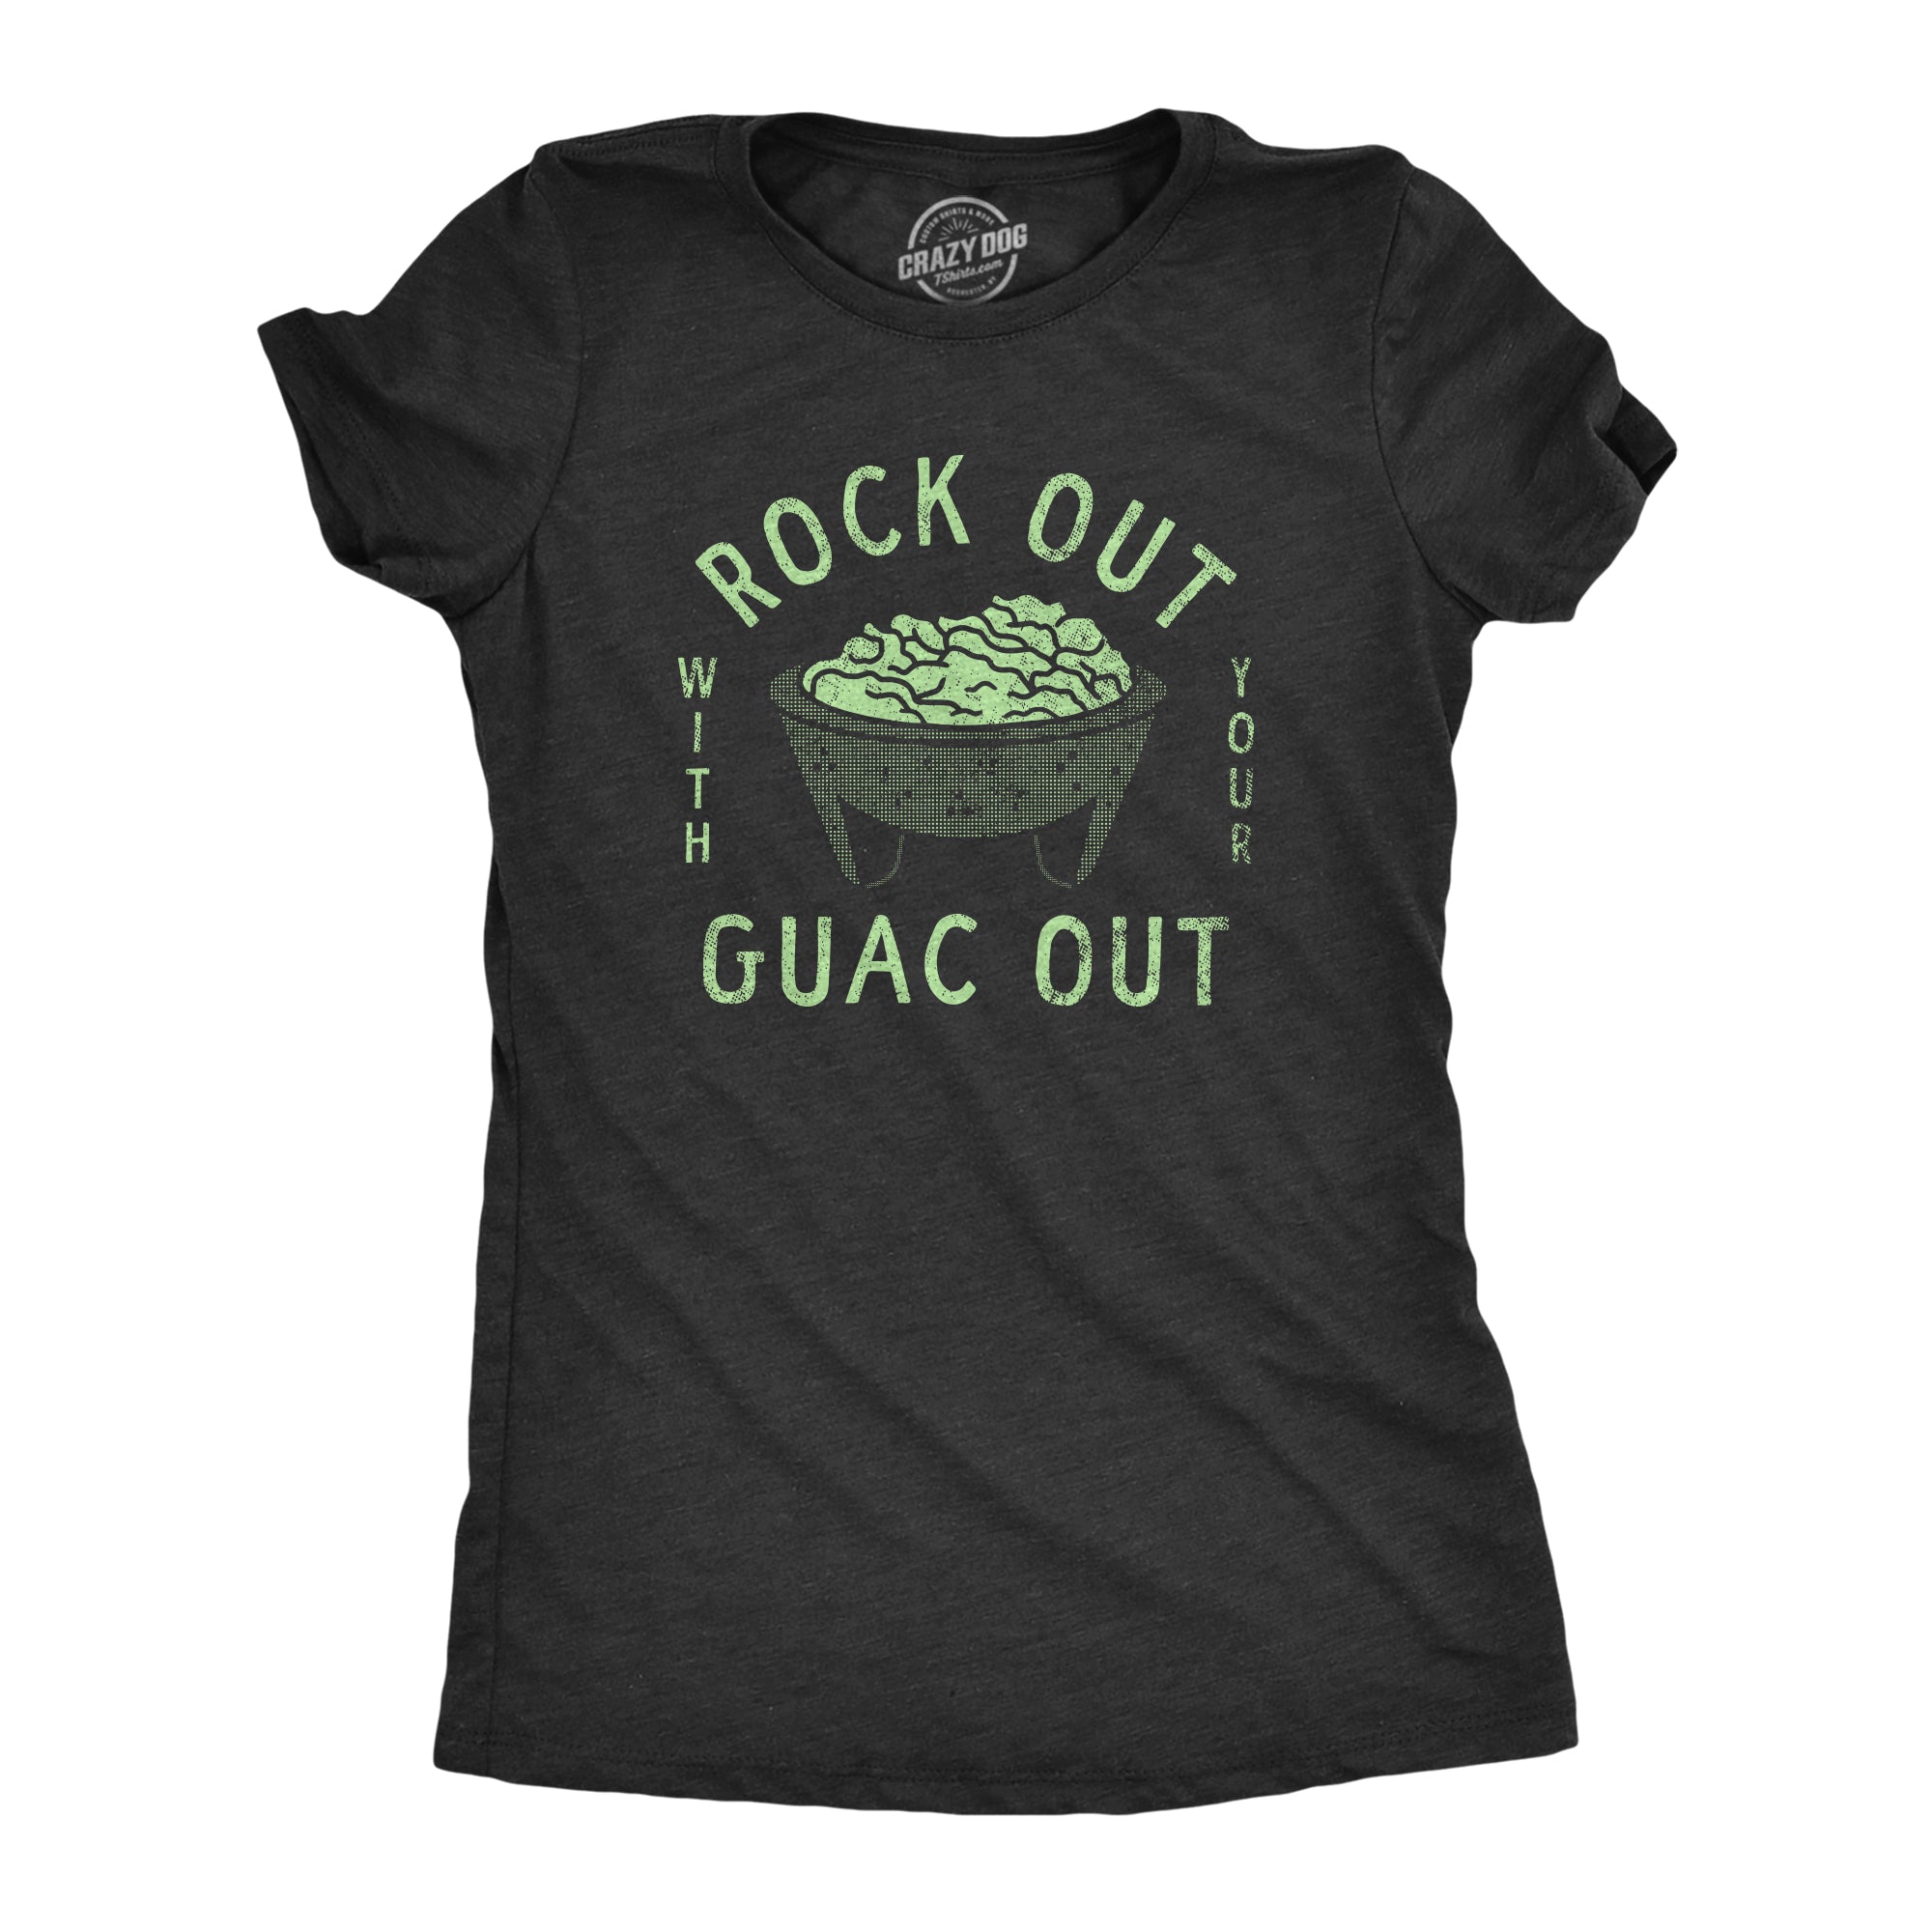 Funny Heather Black - GUAC Rock Out With Your Guac Out Womens T Shirt Nerdy Food Tee